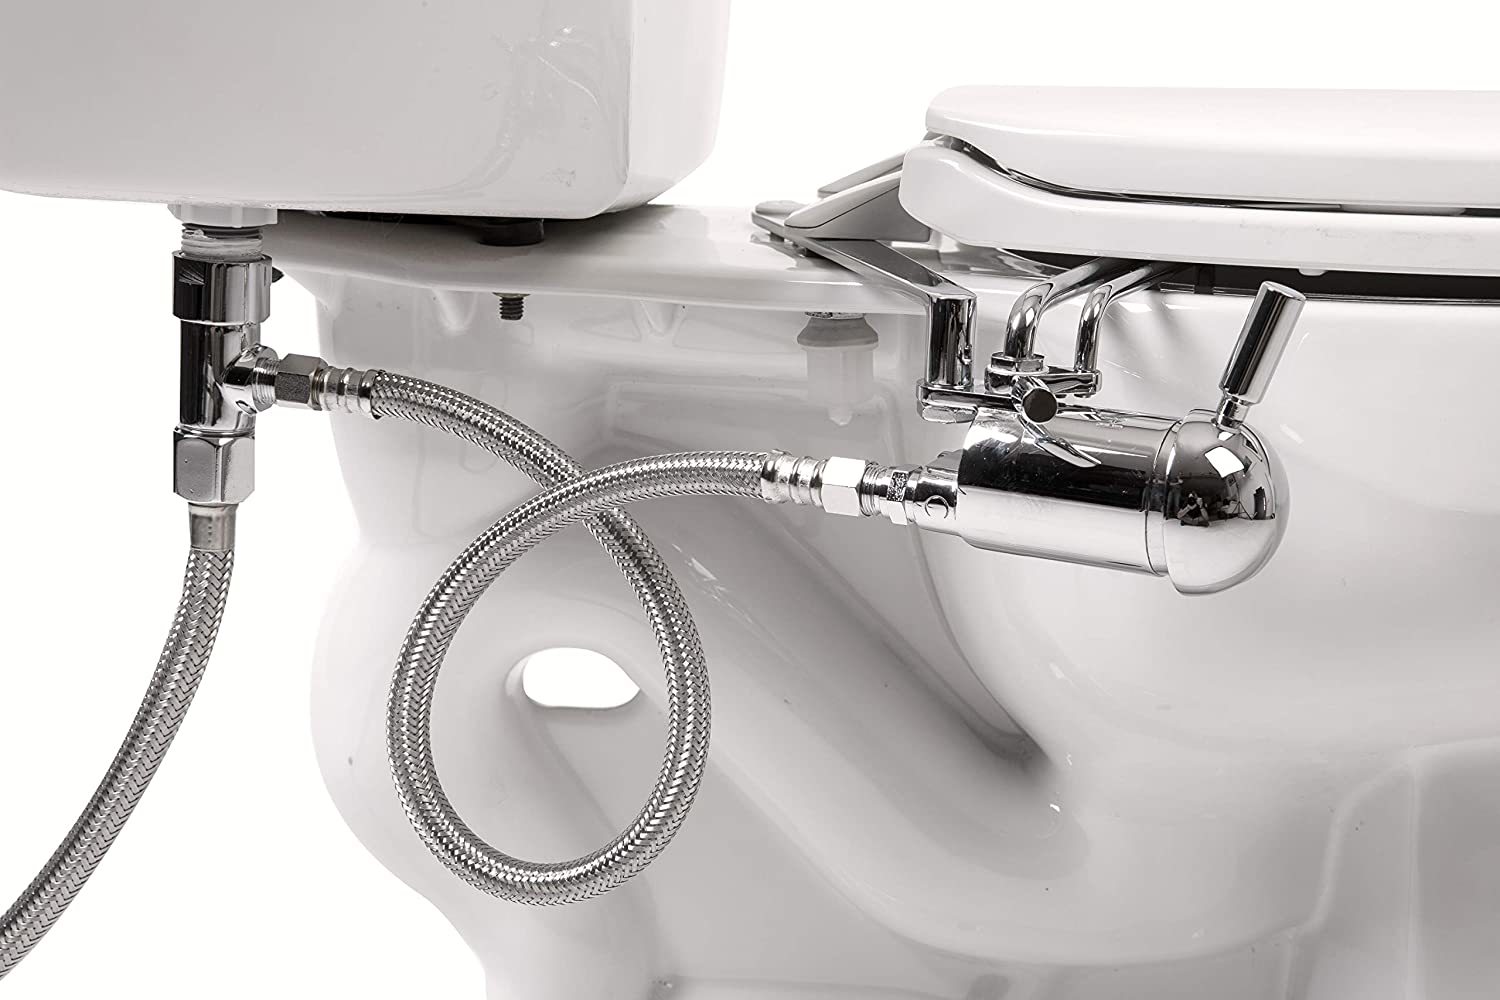 The Gobidet 2003C All Metal Bidet Attachment and 50 similar items